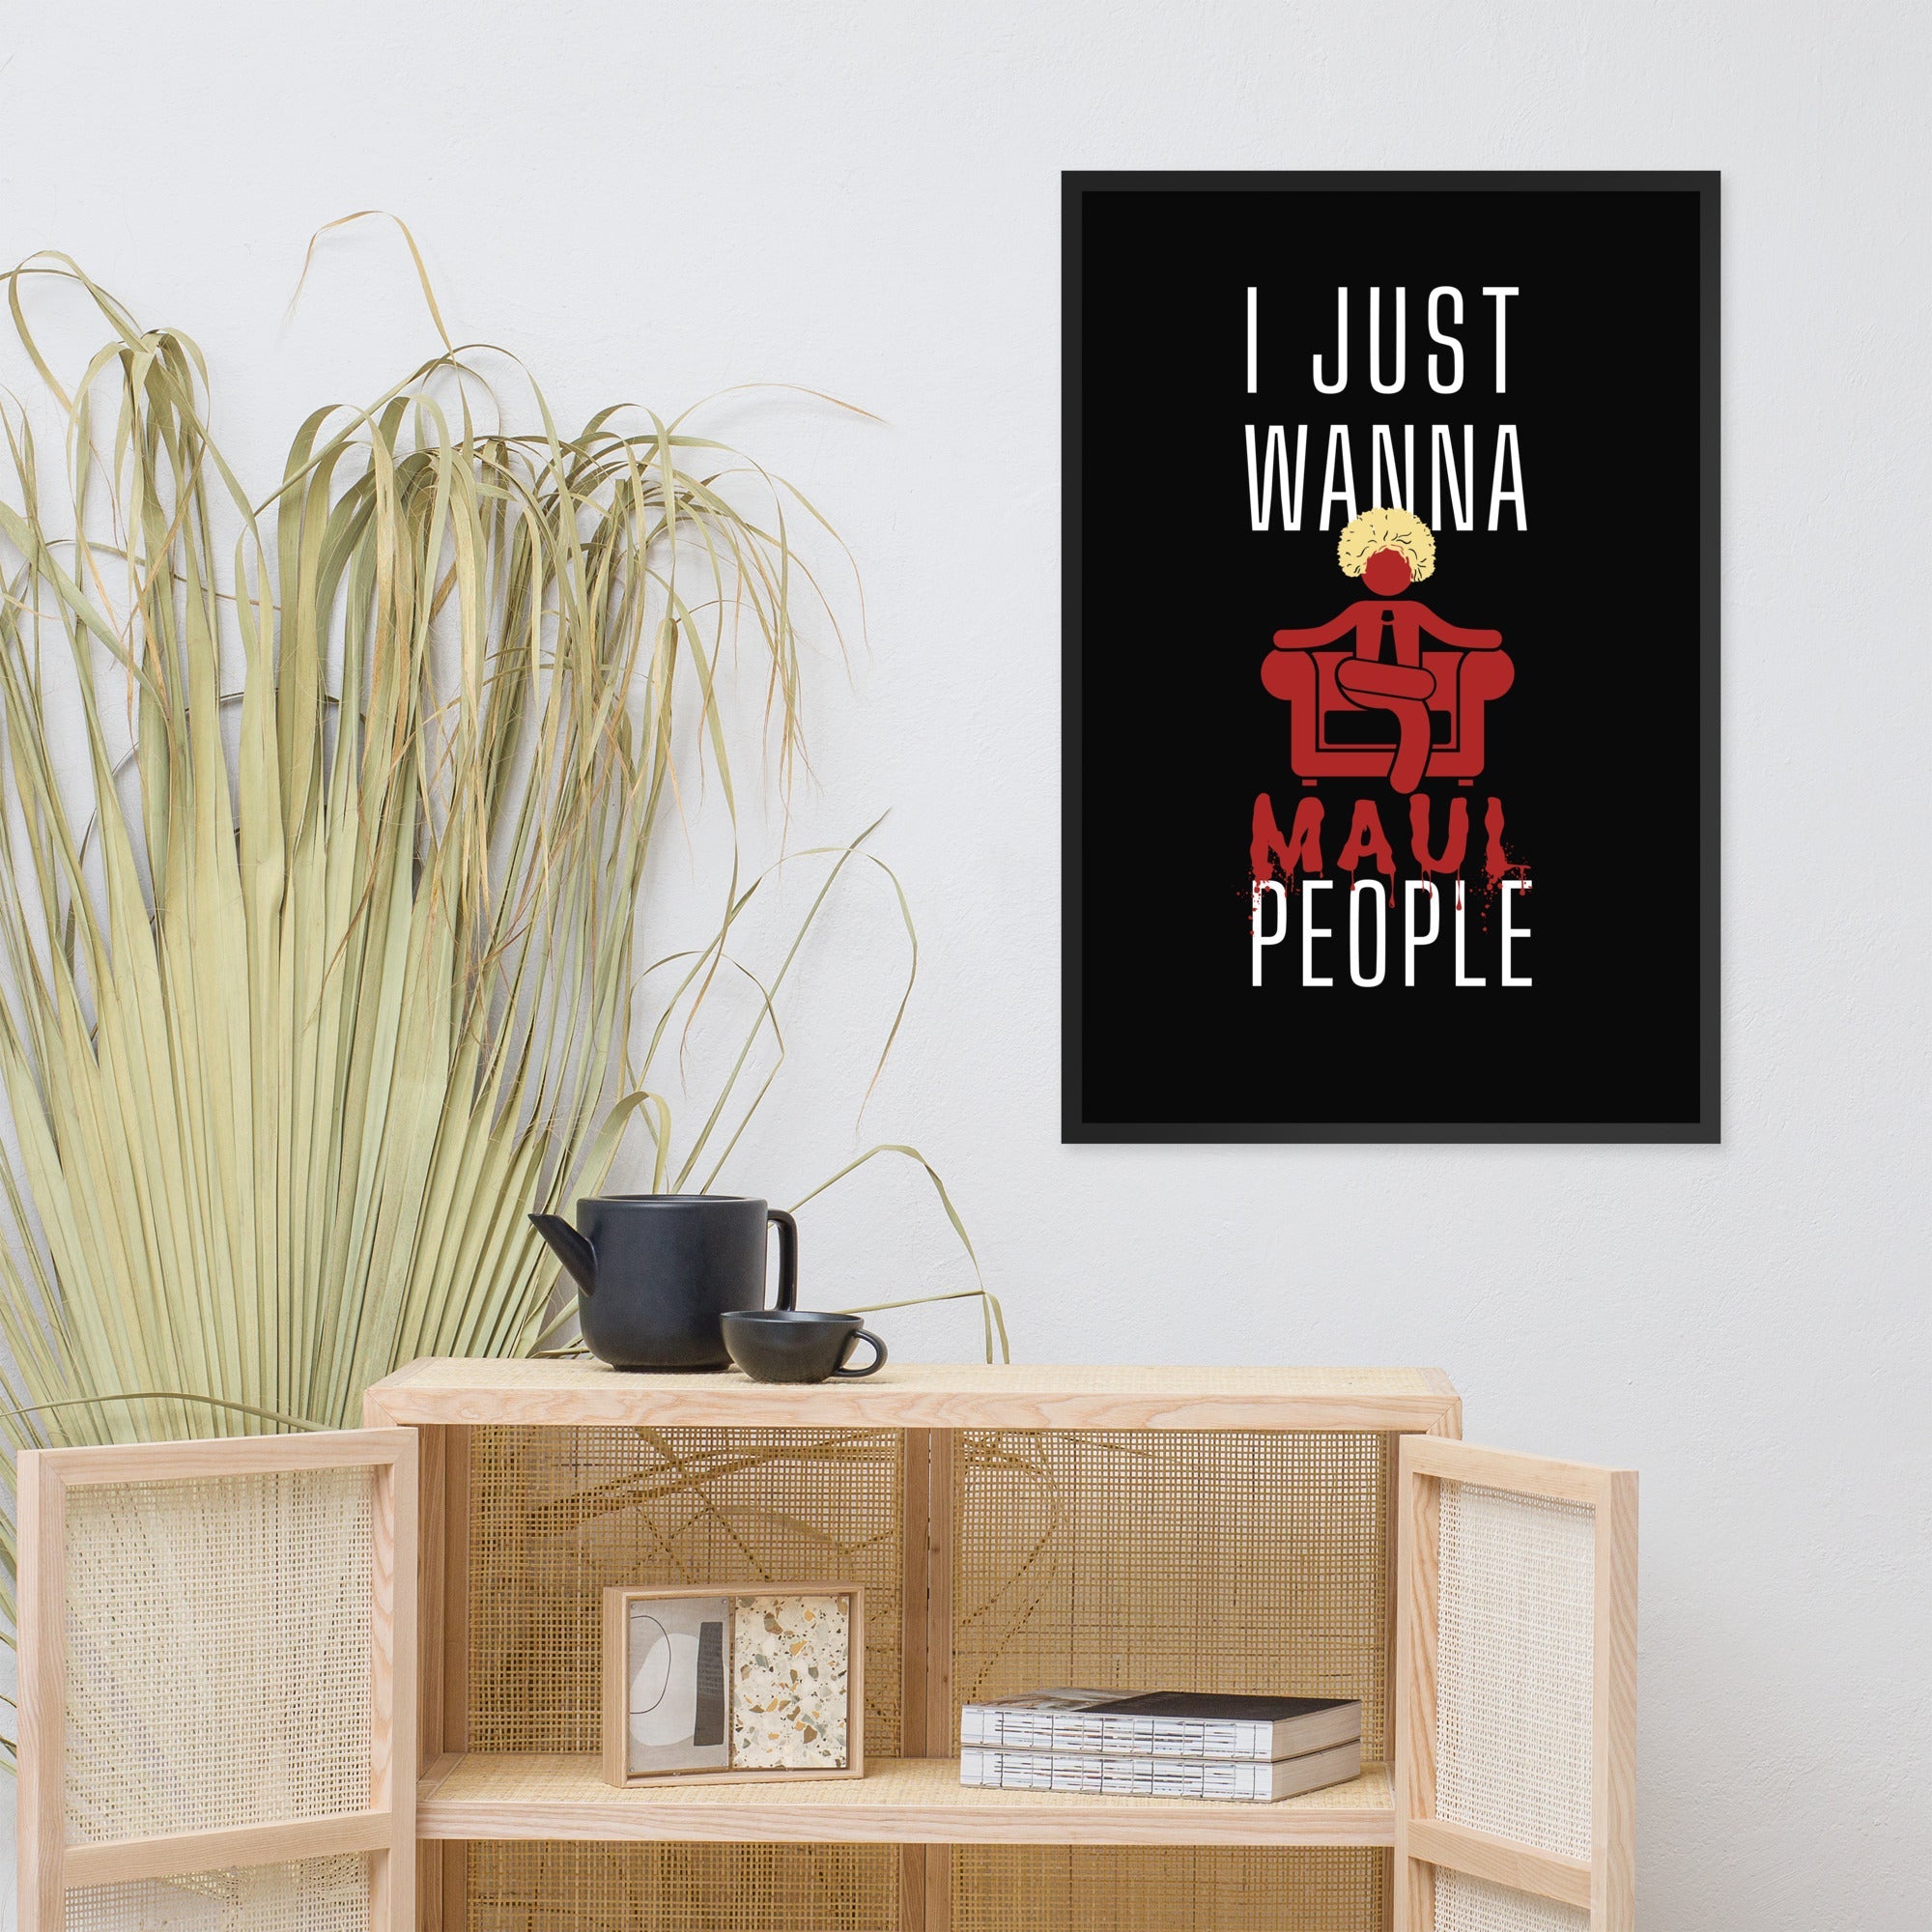 I just wanna MAUL people - Horrible Bosses Version (Black) Posters